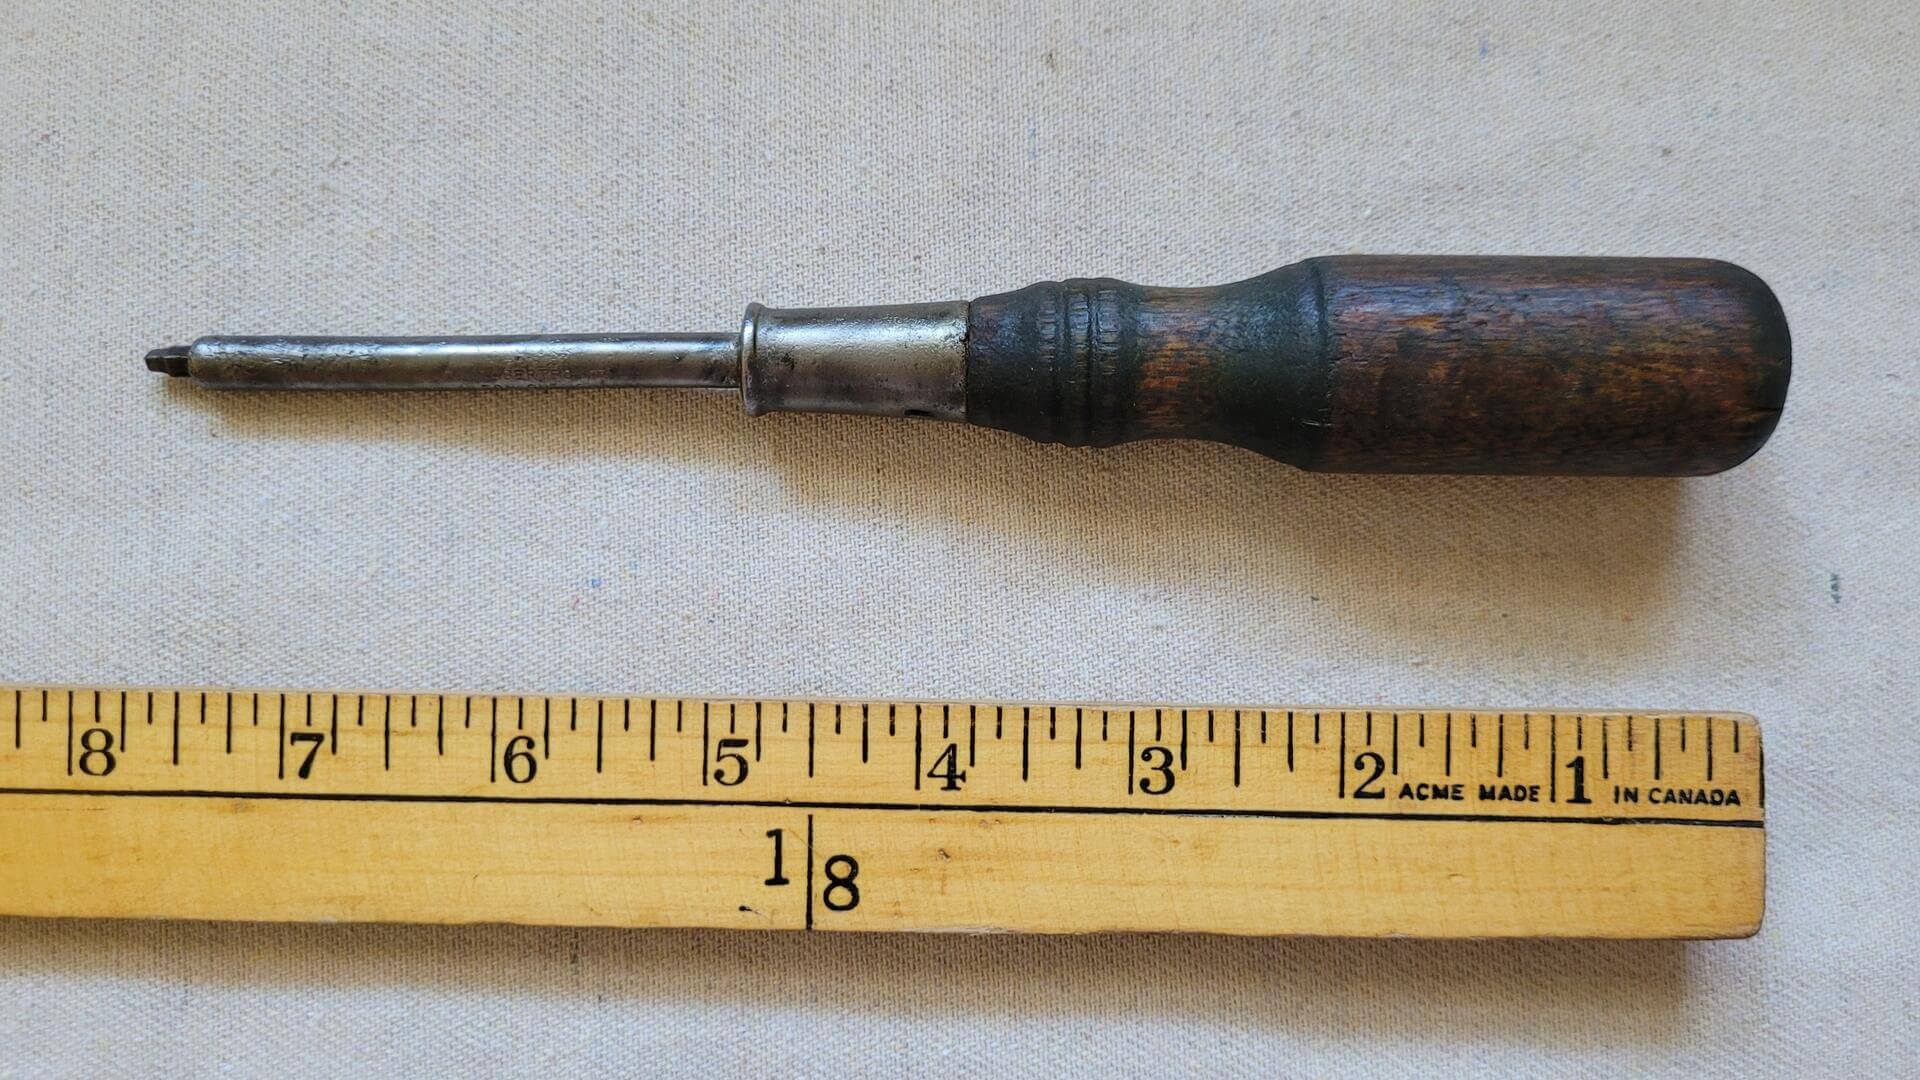 Original Robertson Screwdriver Green Wooden Handle Milton ON - Antique and Vintage P.L. Robertson Co Limited made in Canada Collectible Hand Tools